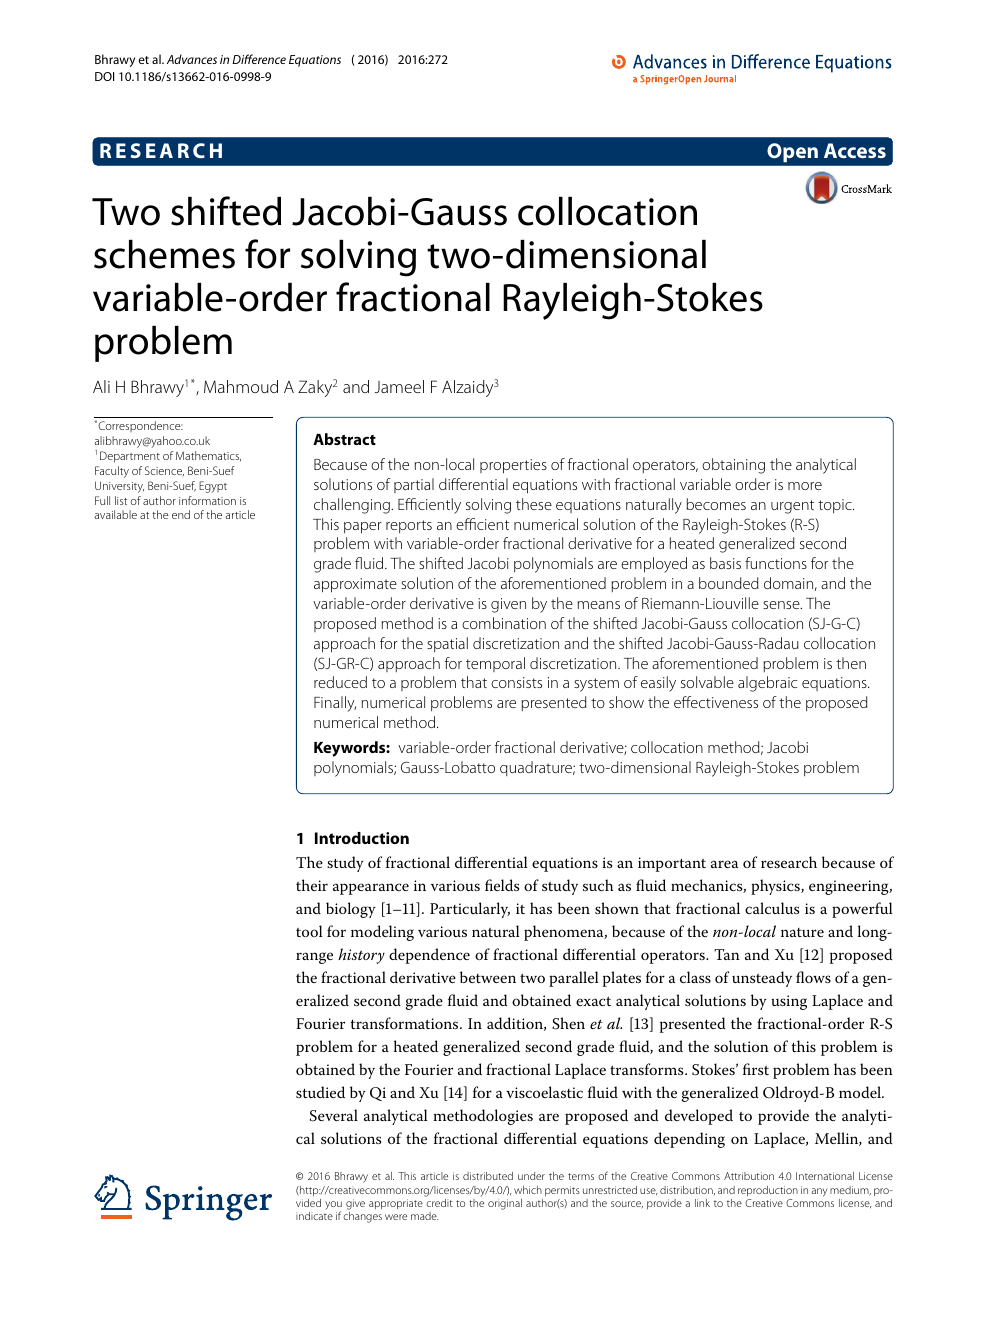 Two Shifted Jacobi Gauss Collocation Schemes For Solving Two Dimensional Variable Order Fractional Rayleigh Stokes Problem Topic Of Research Paper In Mathematics Download Scholarly Article Pdf And Read For Free On Cyberleninka Open Science Hub